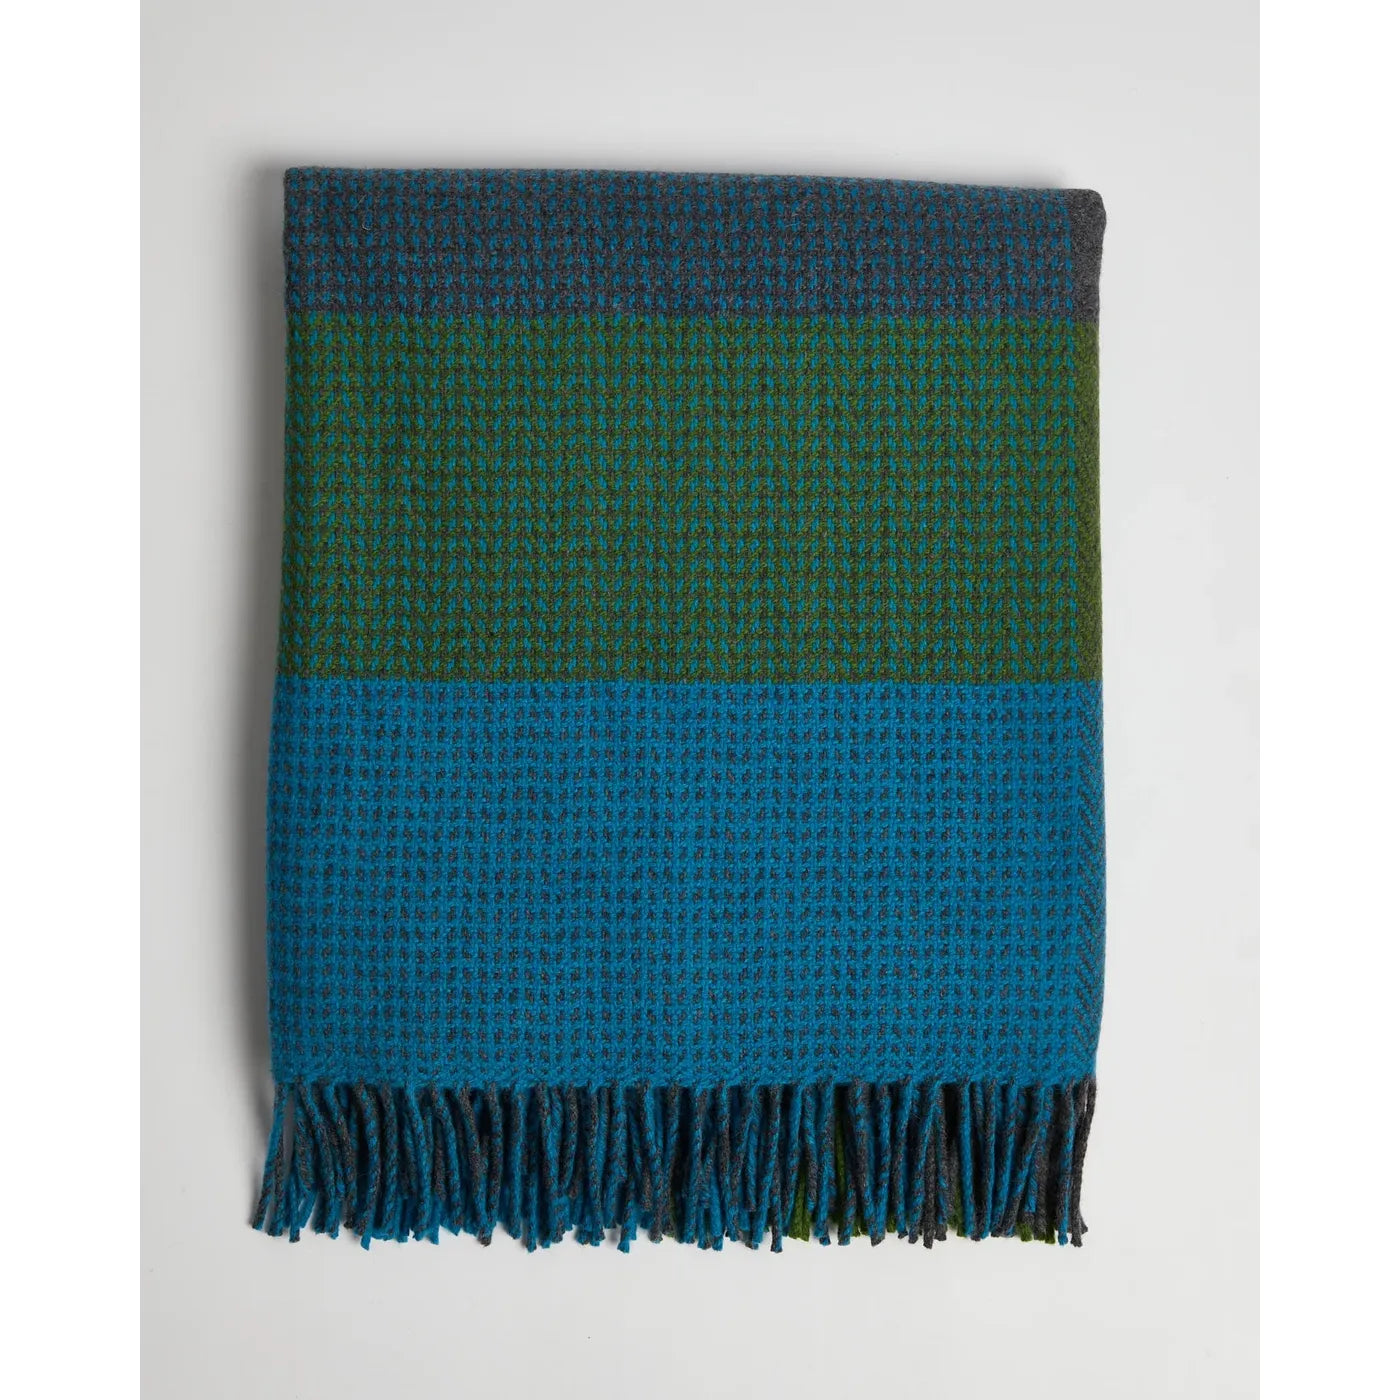 Ceide Cashmere and Lambswool Throw - Foxford